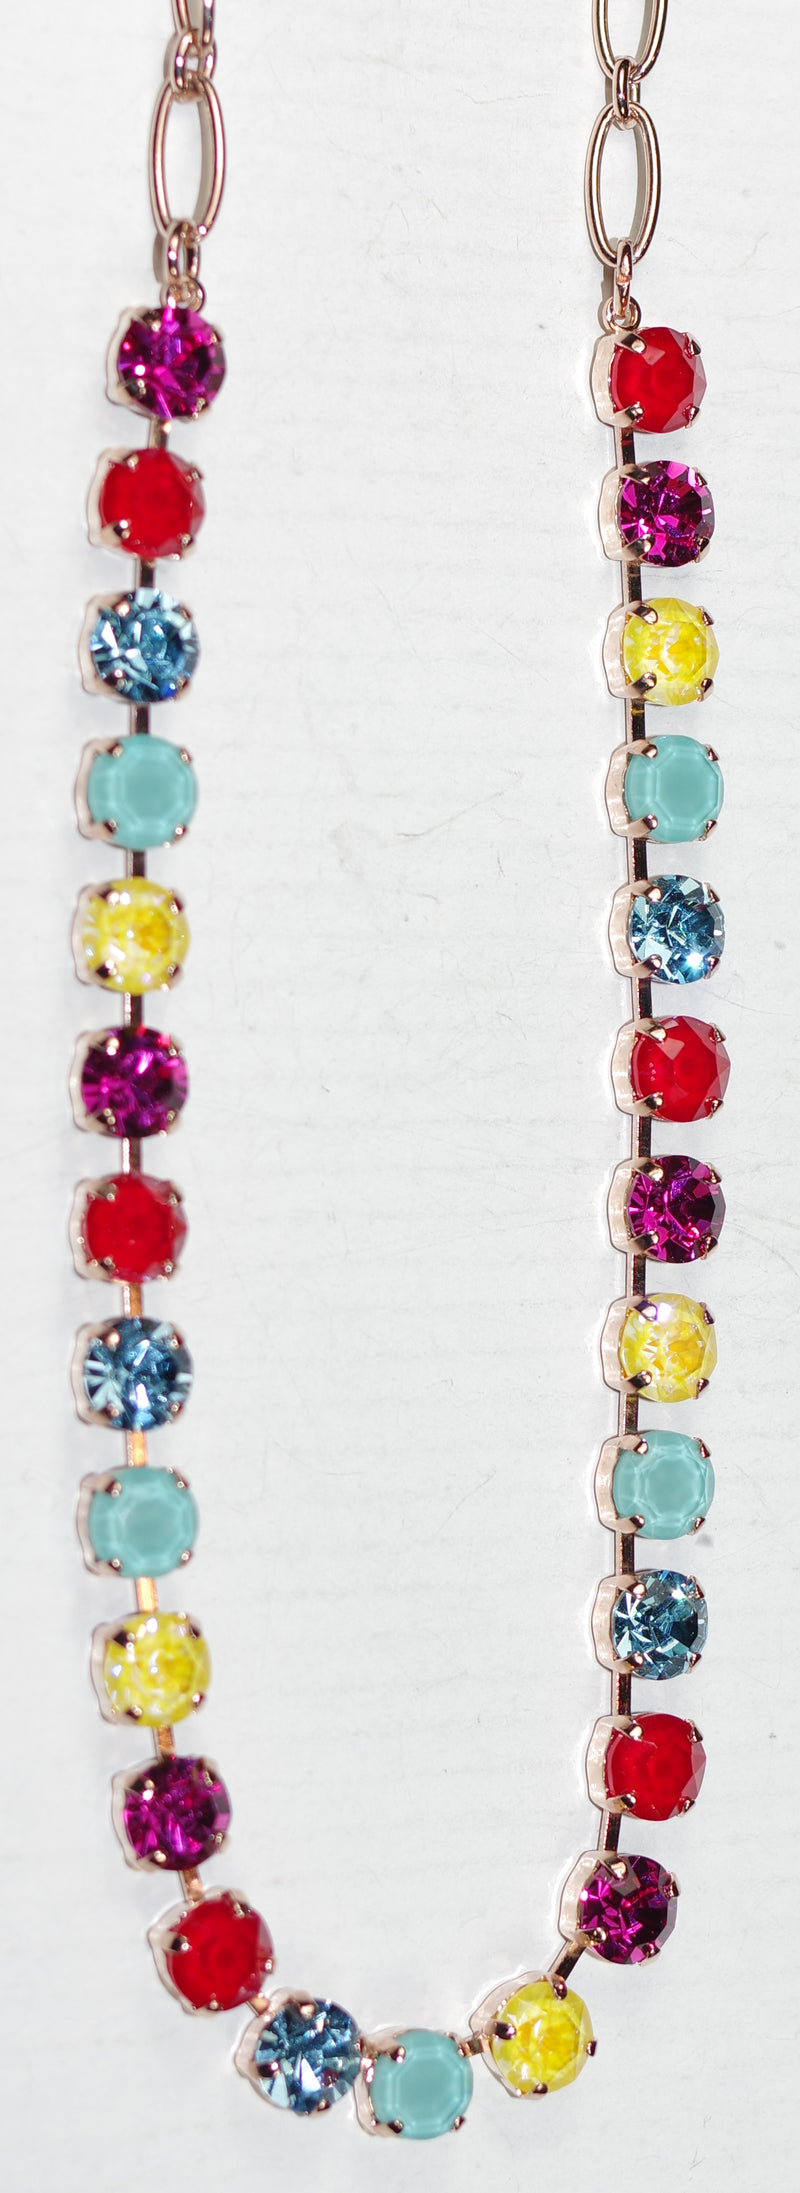 MARIANA NECKLACE BETTE PRETTY WOMAN: blue, red, yellow, fuchsia 1/4" stones in rose gold setting, 17" adjustable chain